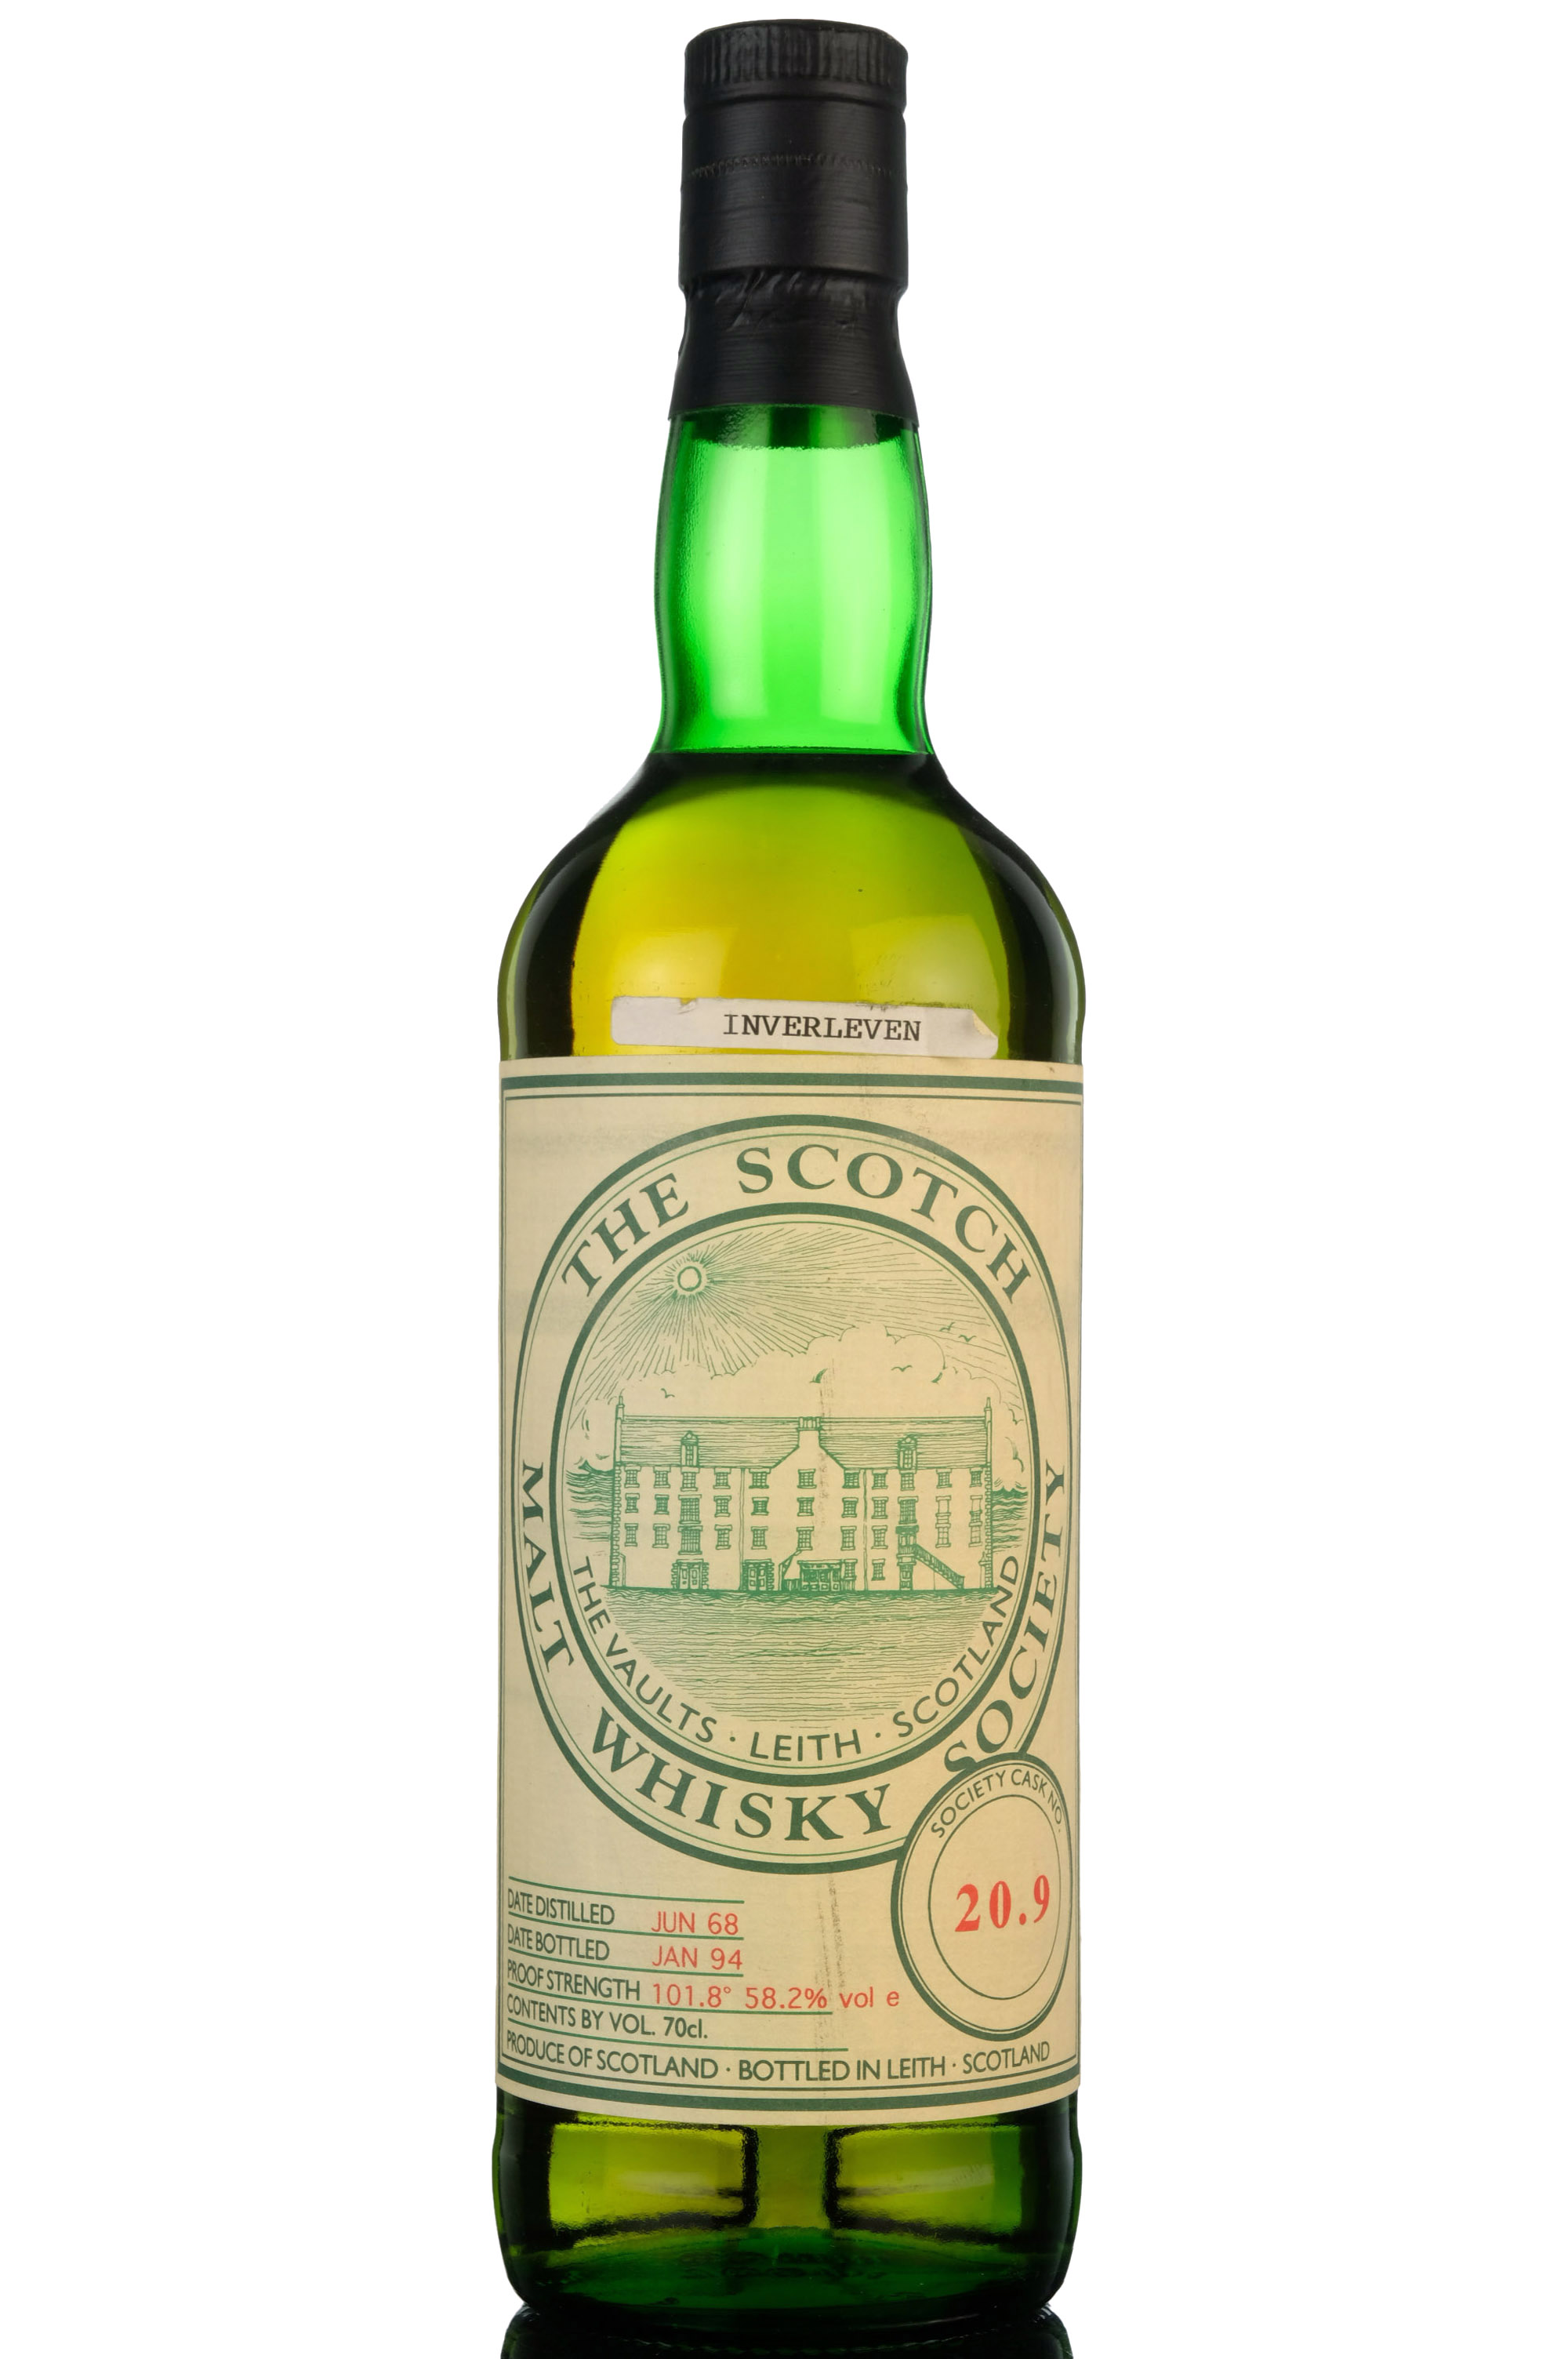 Inverleven 1968-1994 - 25 Year Old - SMWS 20.9